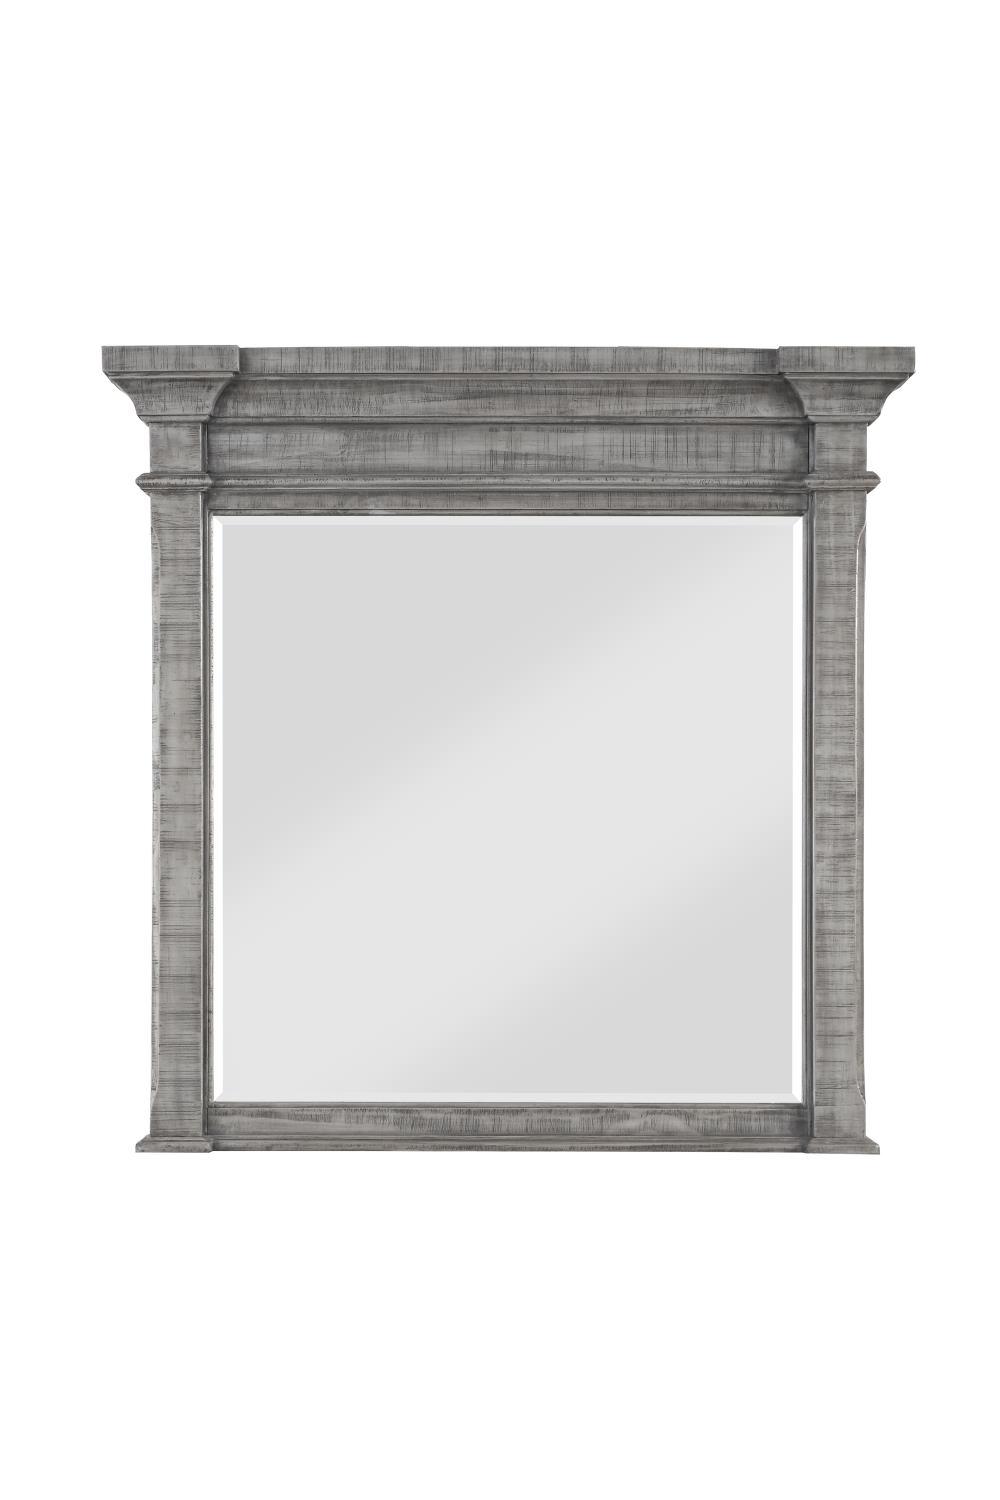 Acme Transitional Mirror With Salvaged Natural Finish 27104